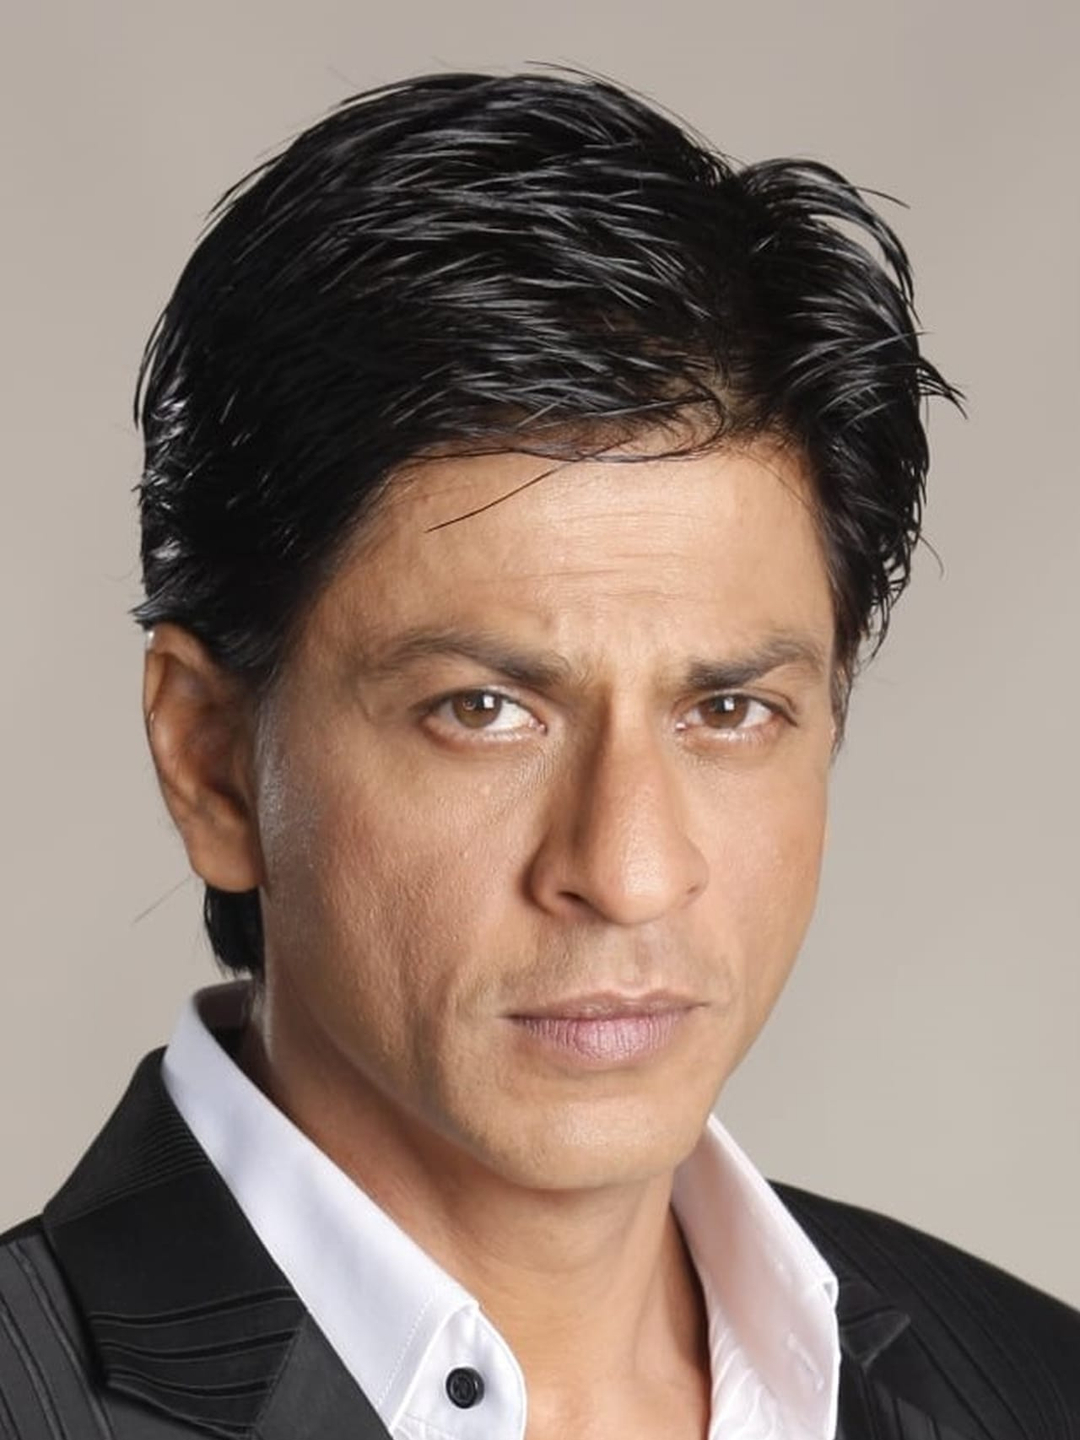 Shah Rukh Khan who is his father